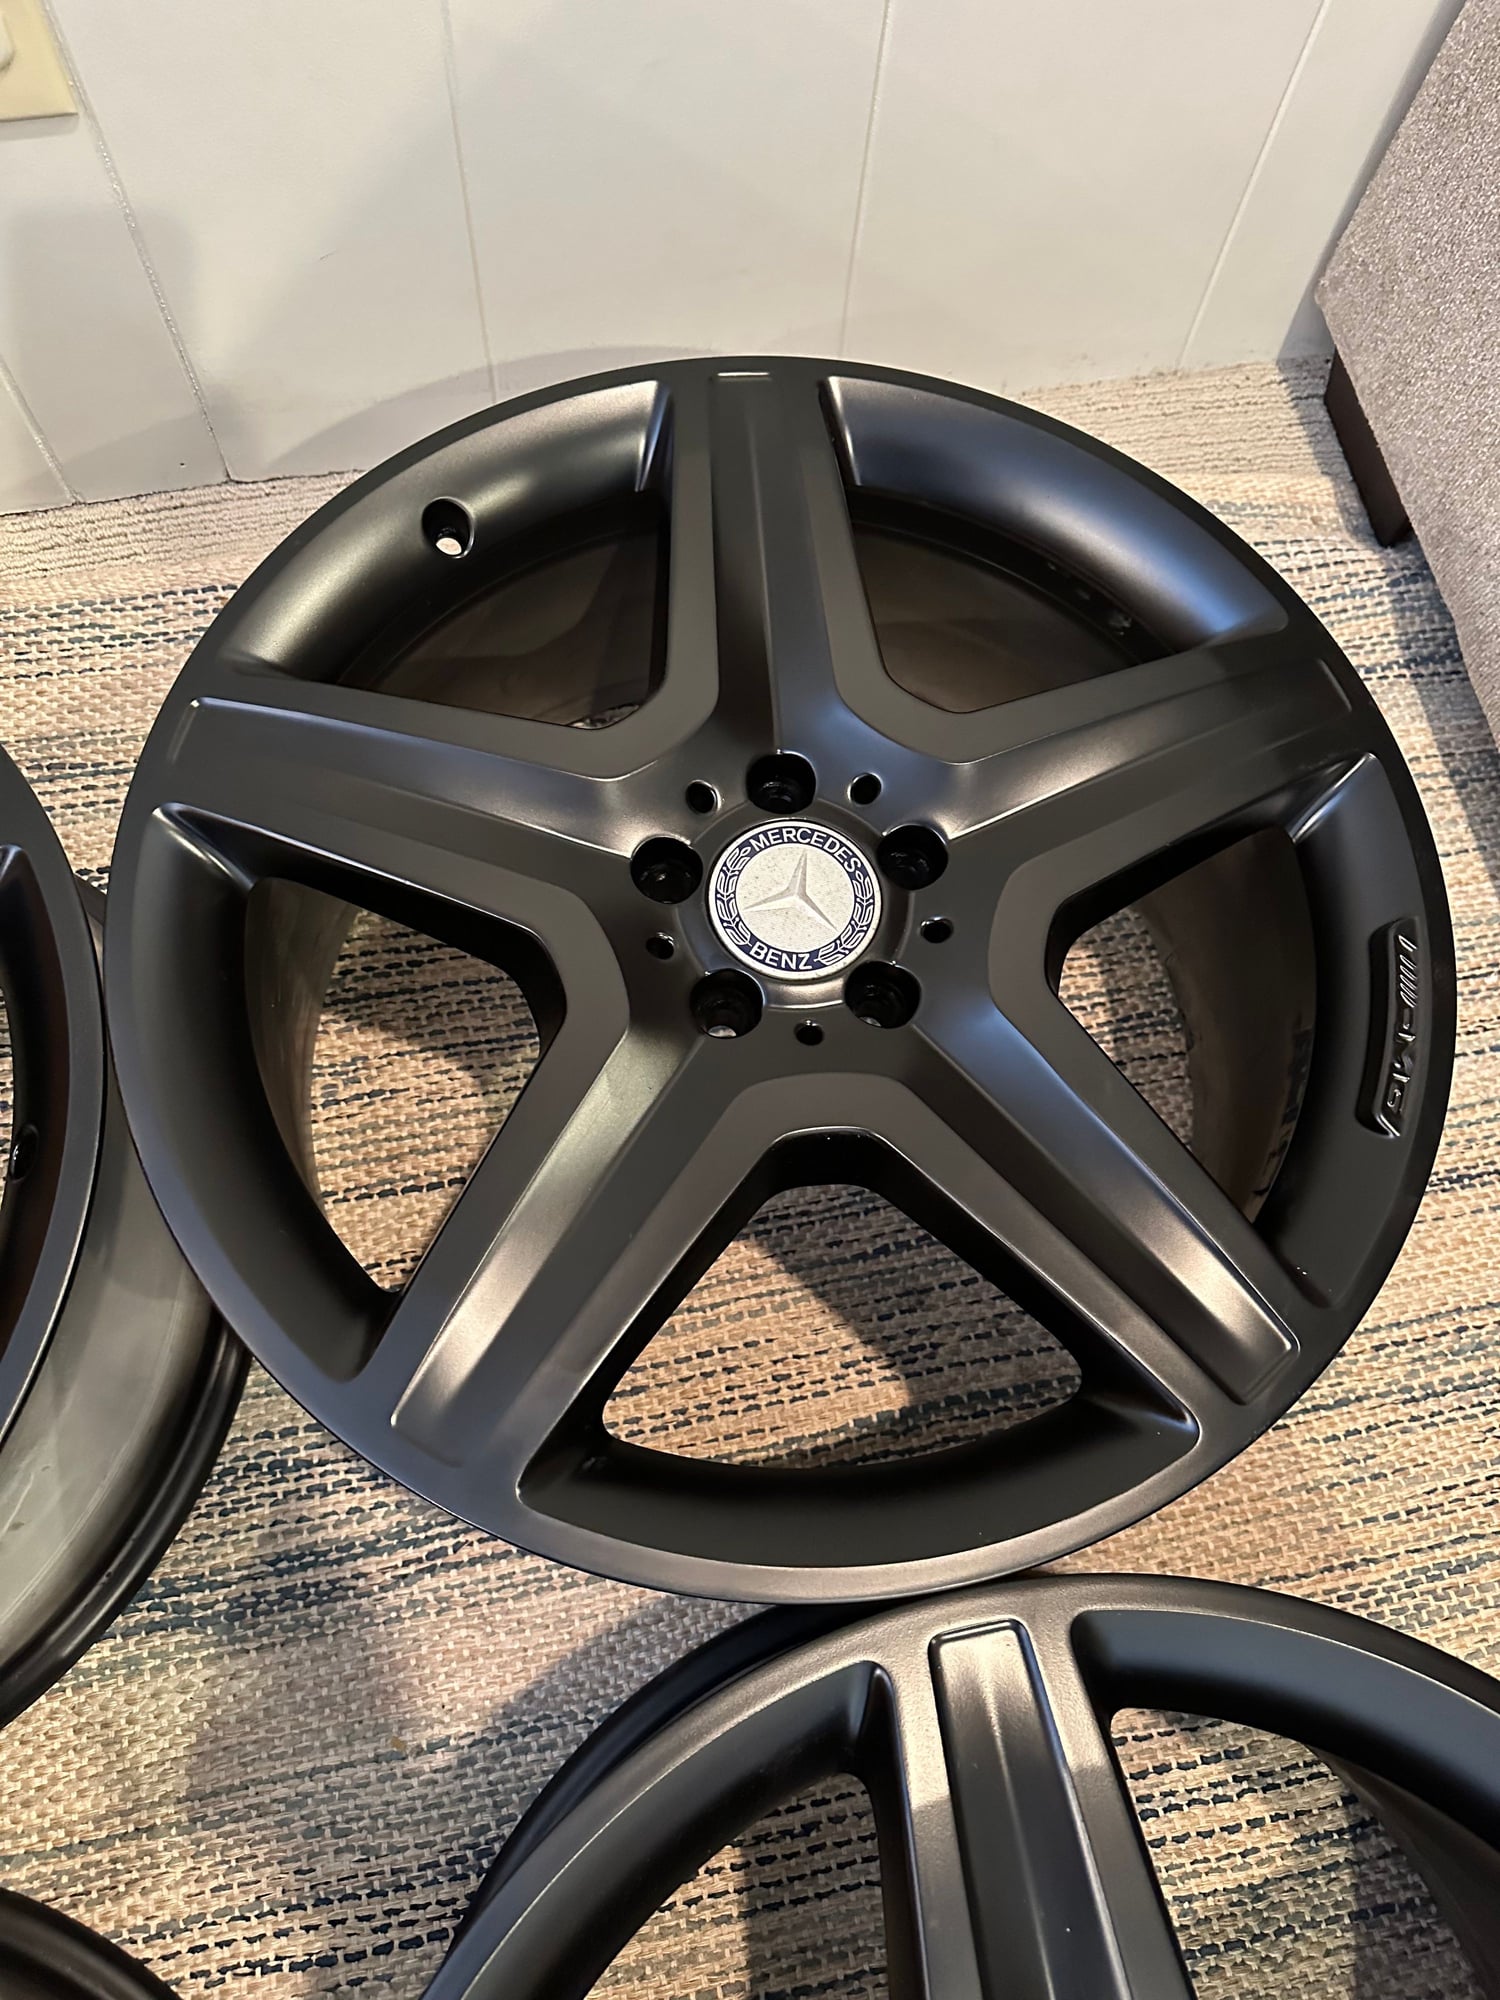 Wheels and Tires/Axles - 20" OEM Mercedes Benz GL ML AMG Wheels - Like NEW - Satin Black - Used - 0  All Models - Plymouth, MN 55447, United States